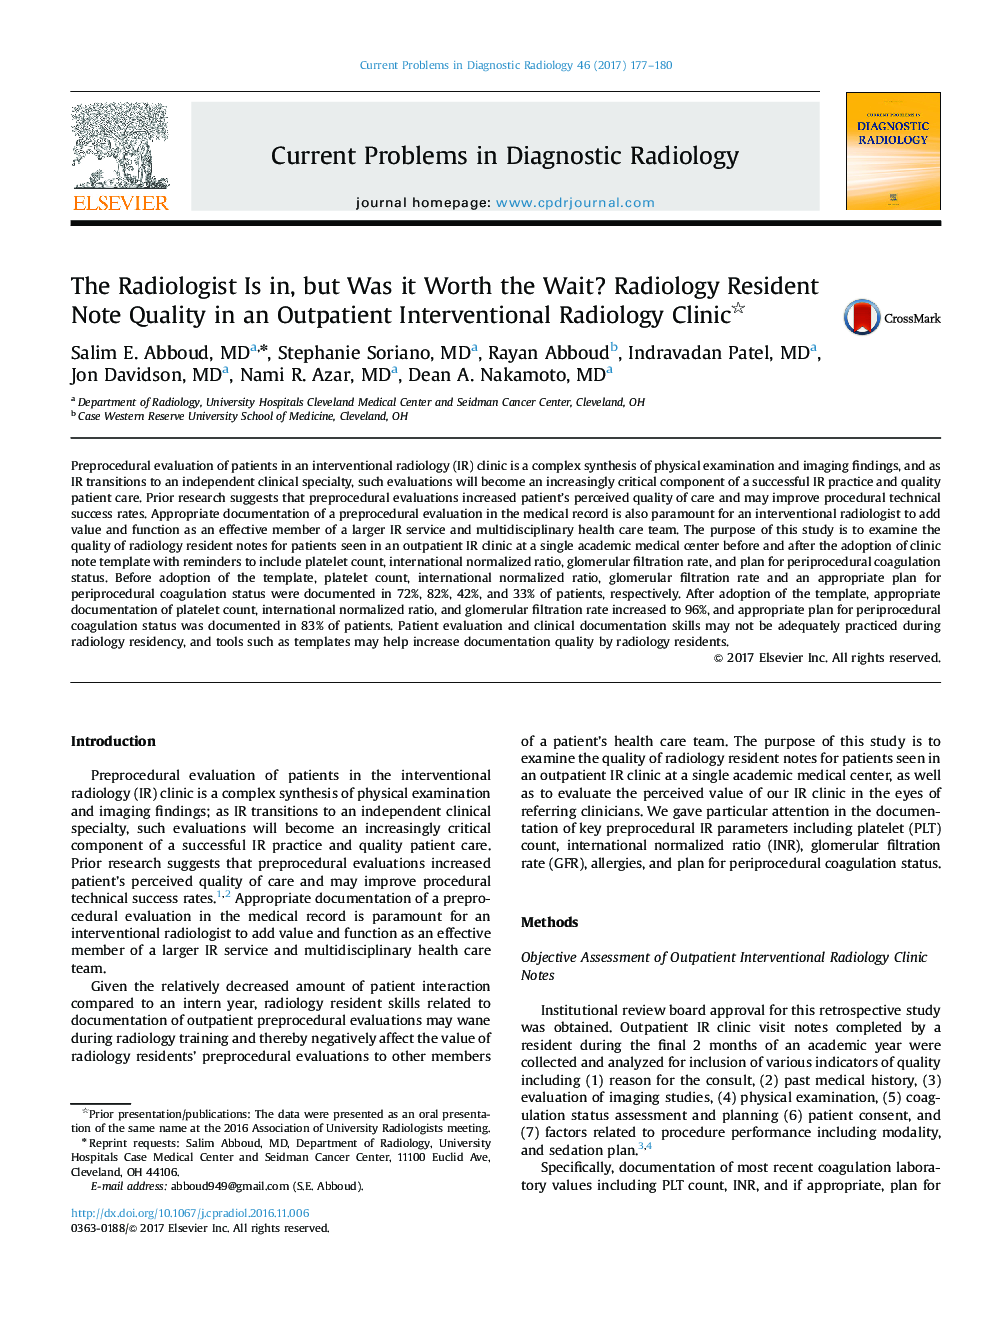 The Radiologist Is in, but Was it Worth the Wait? Radiology Resident Note Quality in an Outpatient Interventional Radiology Clinic